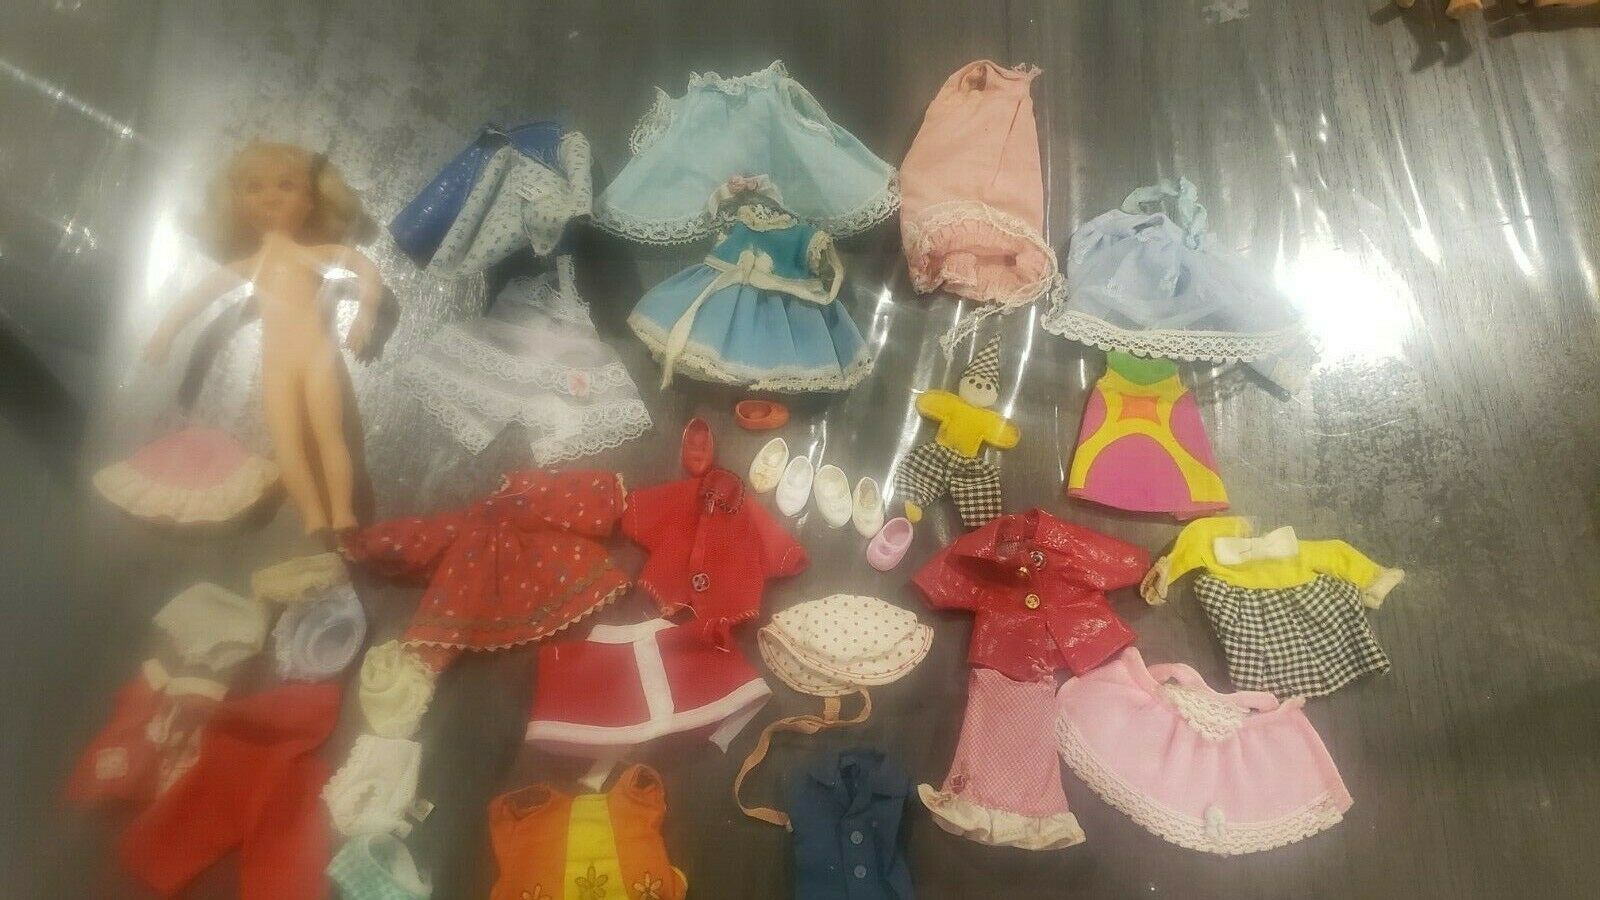 Melody In Pink Tutti With Clothes And Shoes.  Poor Condition Lot  Ships 🚢 Free!